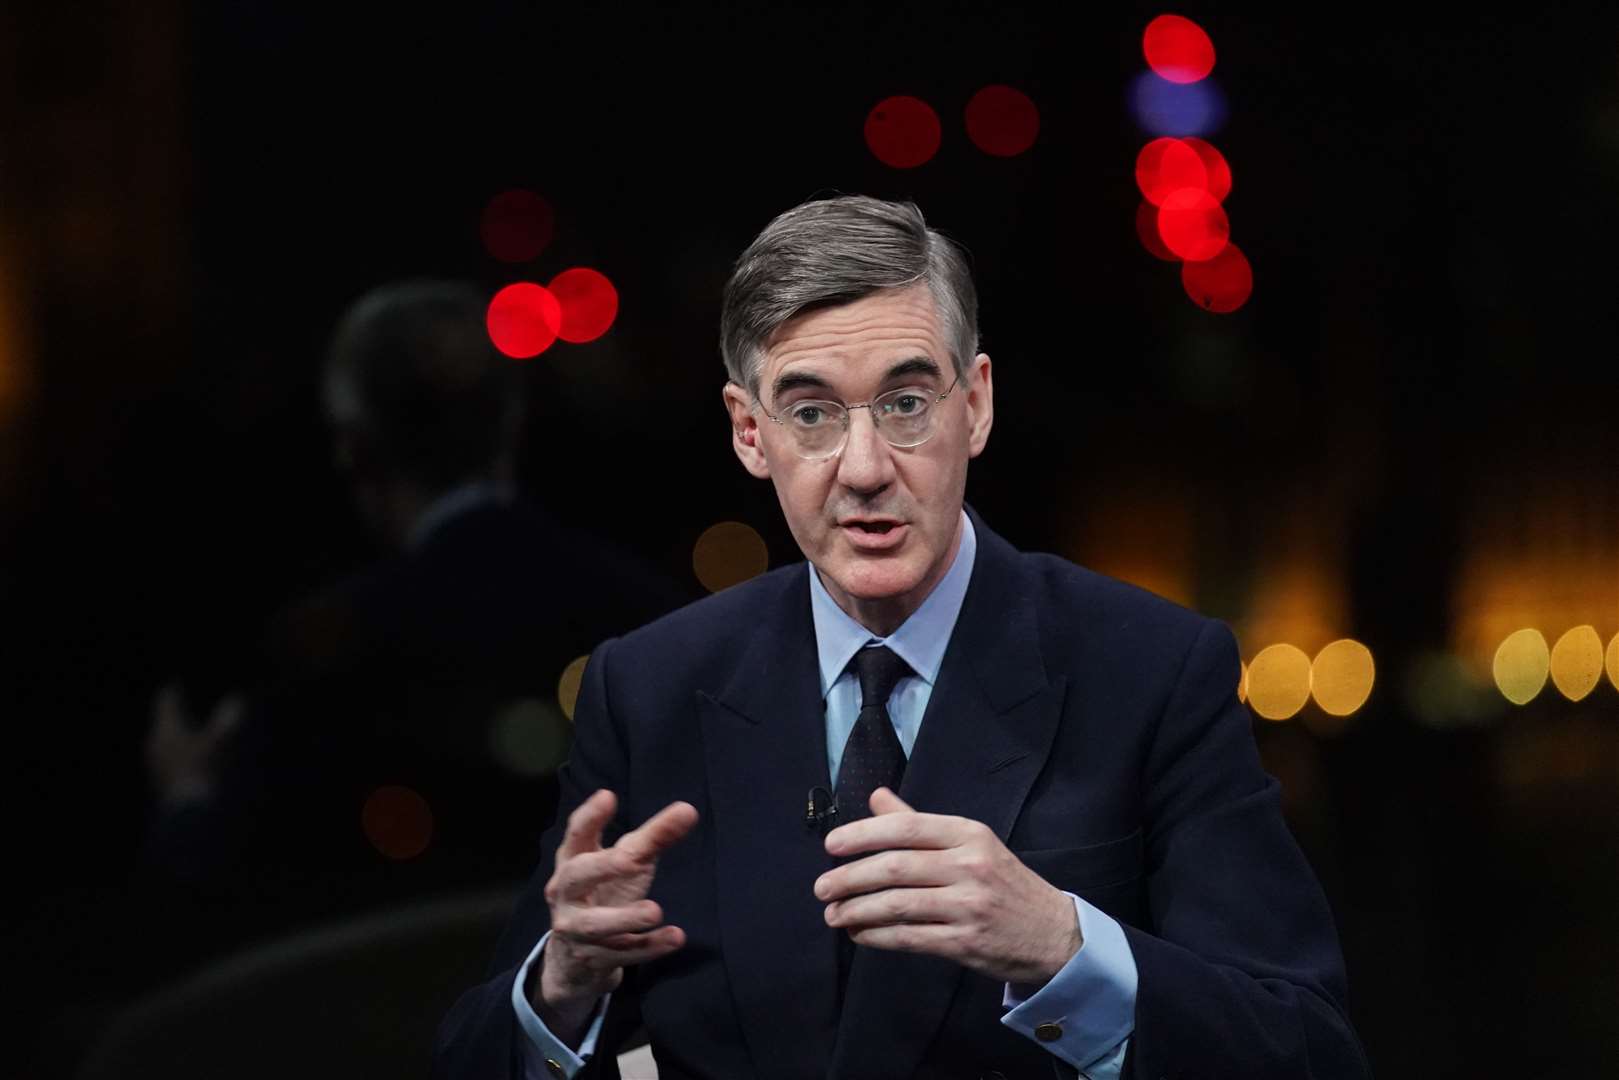 Jacob Rees-Mogg said gerrymandering efforts usually “come back to bite” the parties that introduce them (Stefan Rousseau/PA)